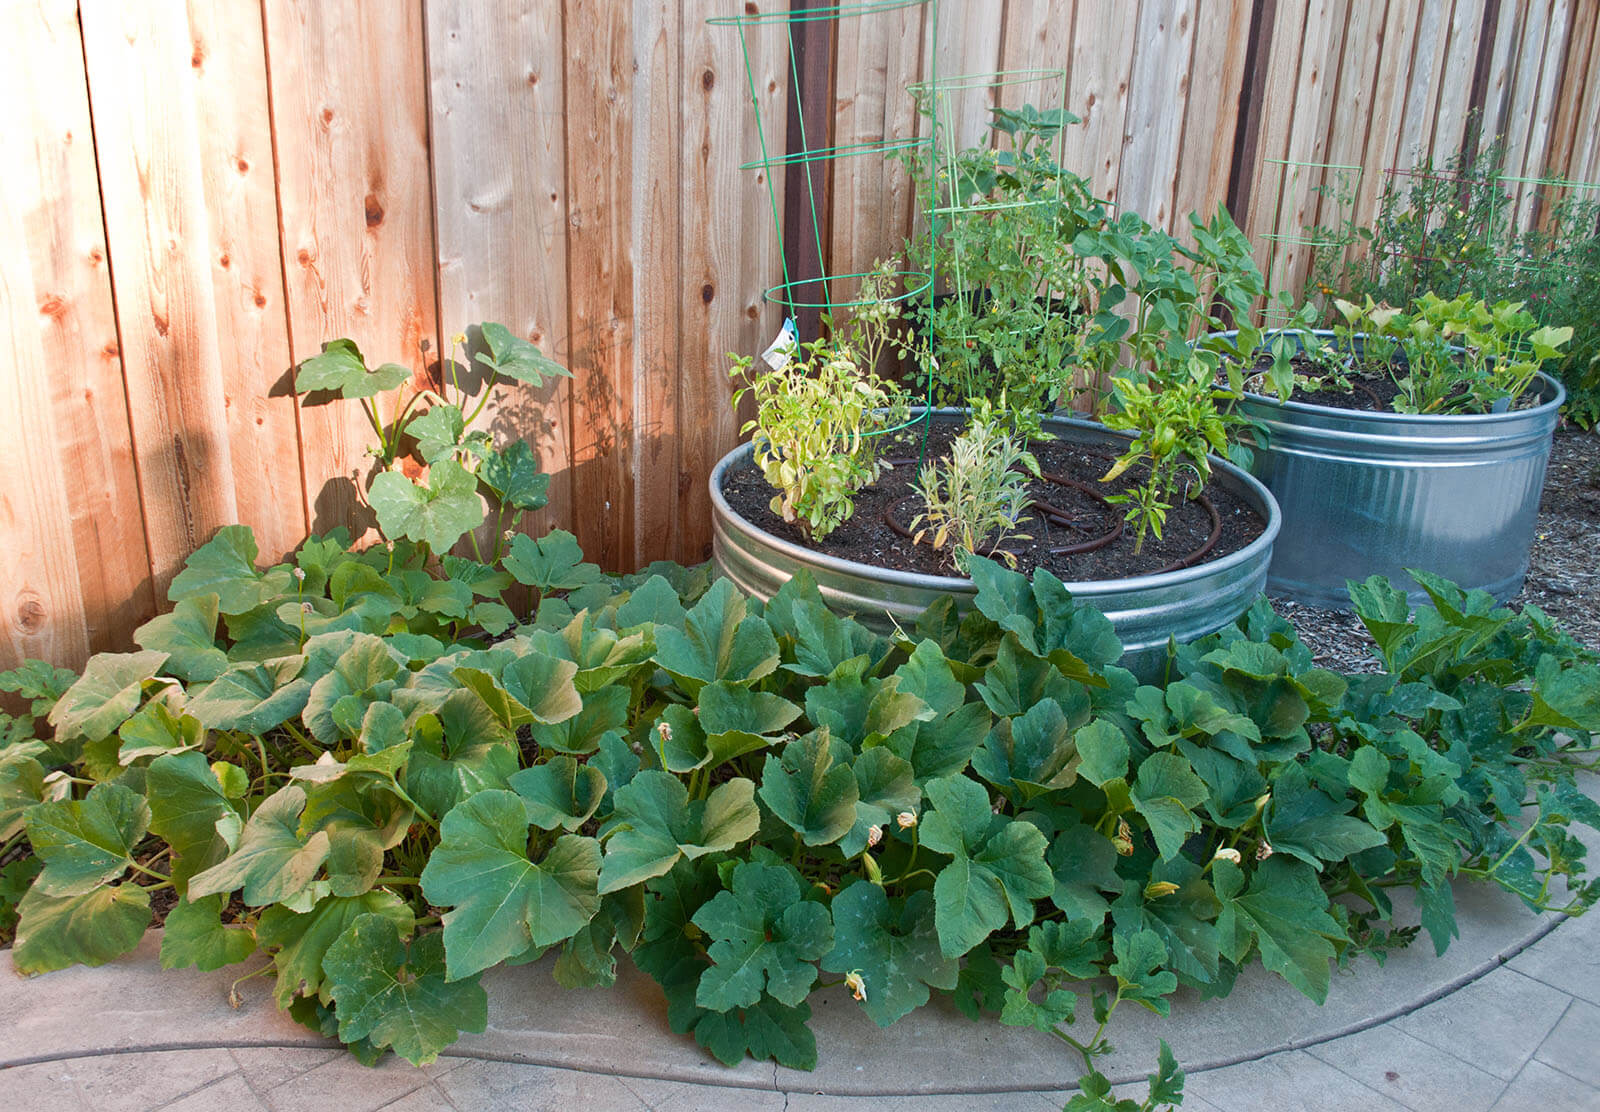 Raised round metal beds with planters, and squash growing below